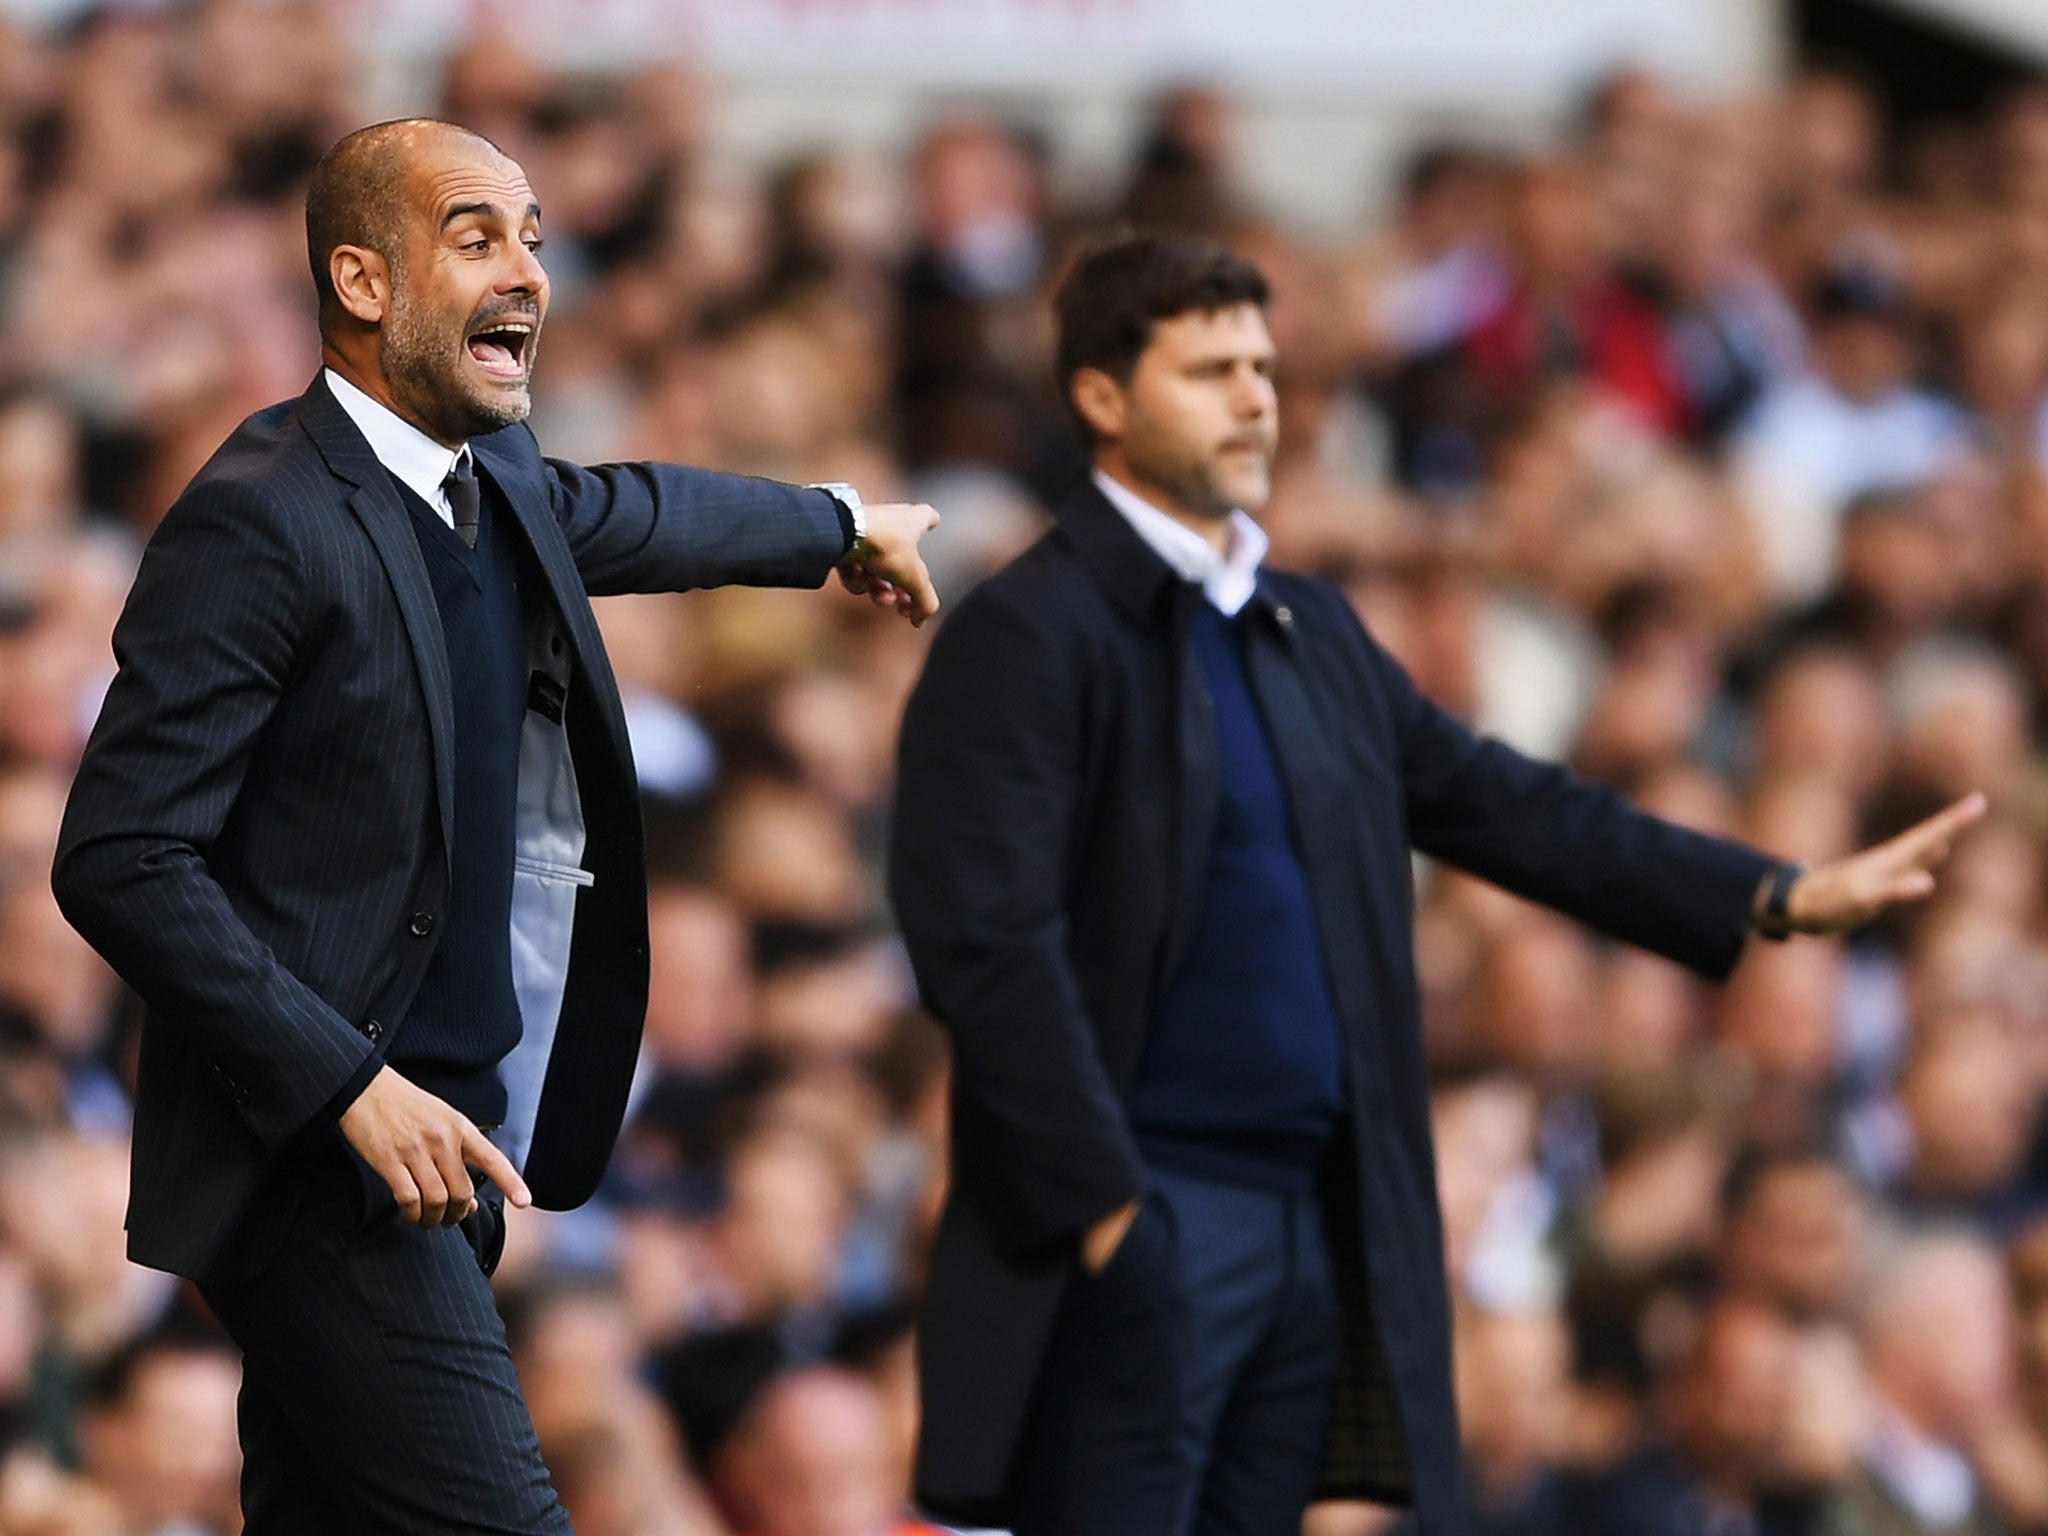 The Manchester City manager said he didn't mean to disrespect the Tottenham boss